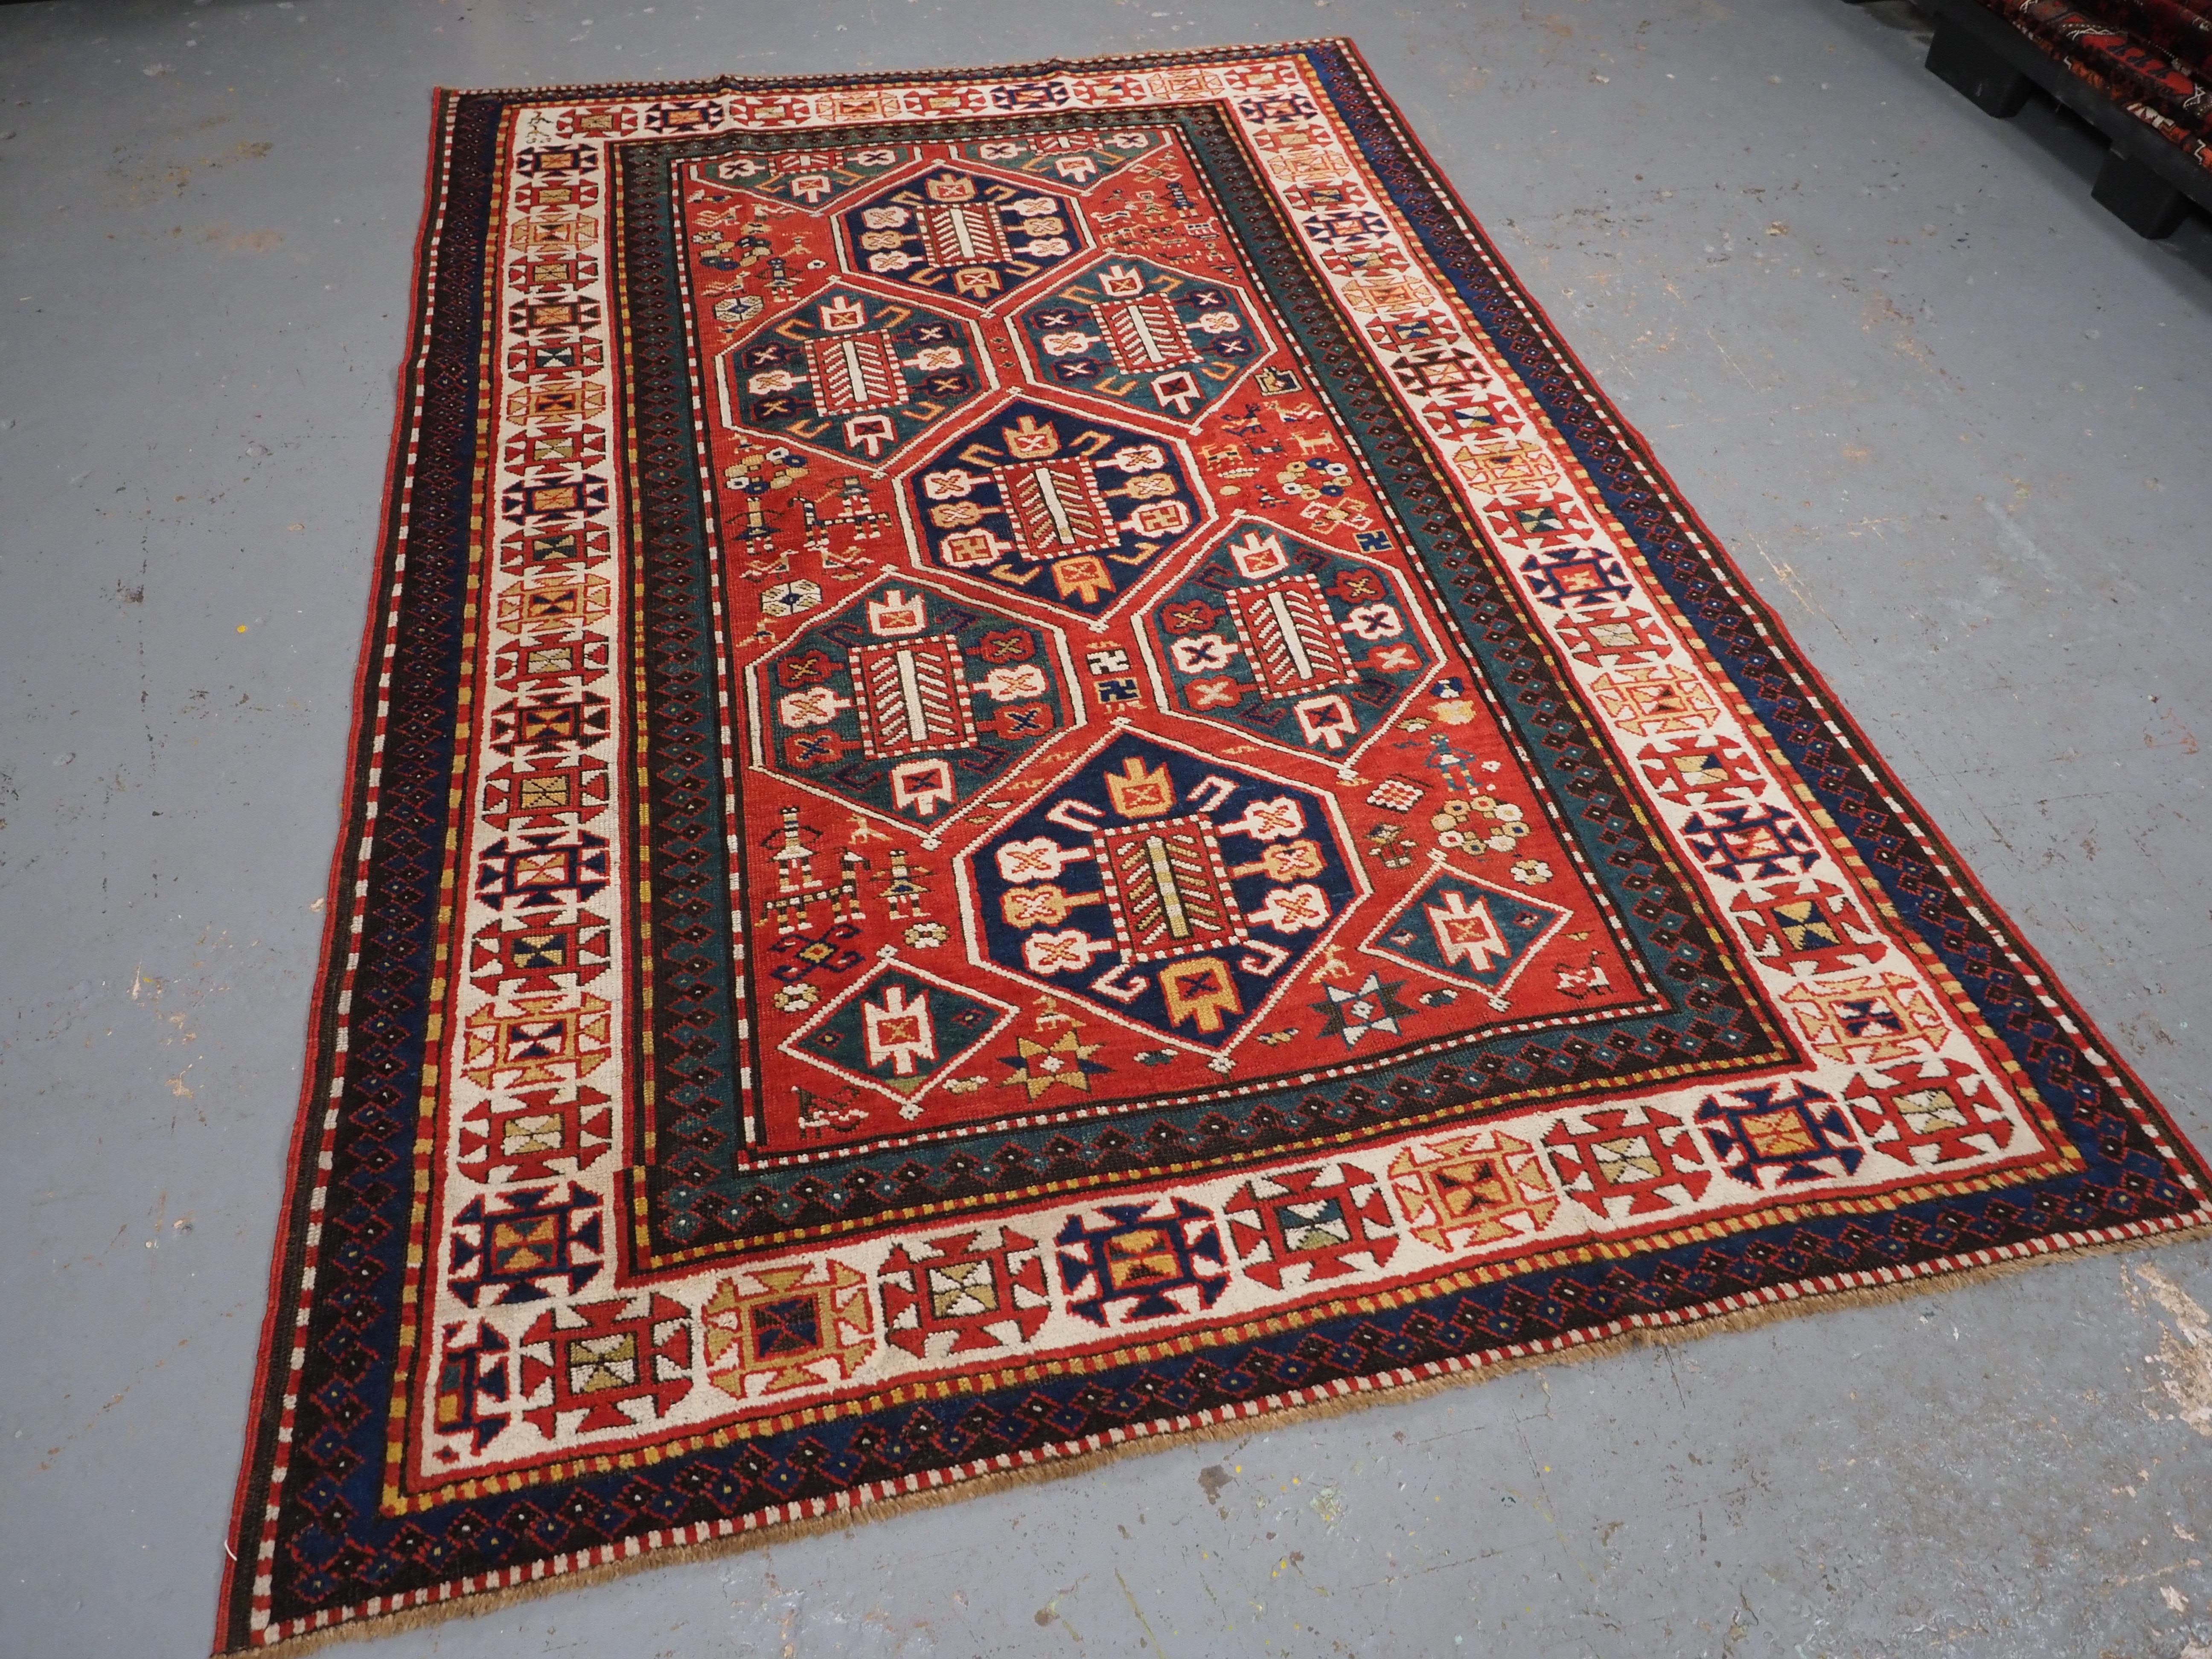 
Size: 7ft 9in x 5ft 1in (235 x 155cm).

Antique Caucasian Gendje rug with wonderful folk art design.

Circa 1890.

A truly outstanding rug with classic diamond medallion design on a madder red ground. The field is filled with illustrations of the